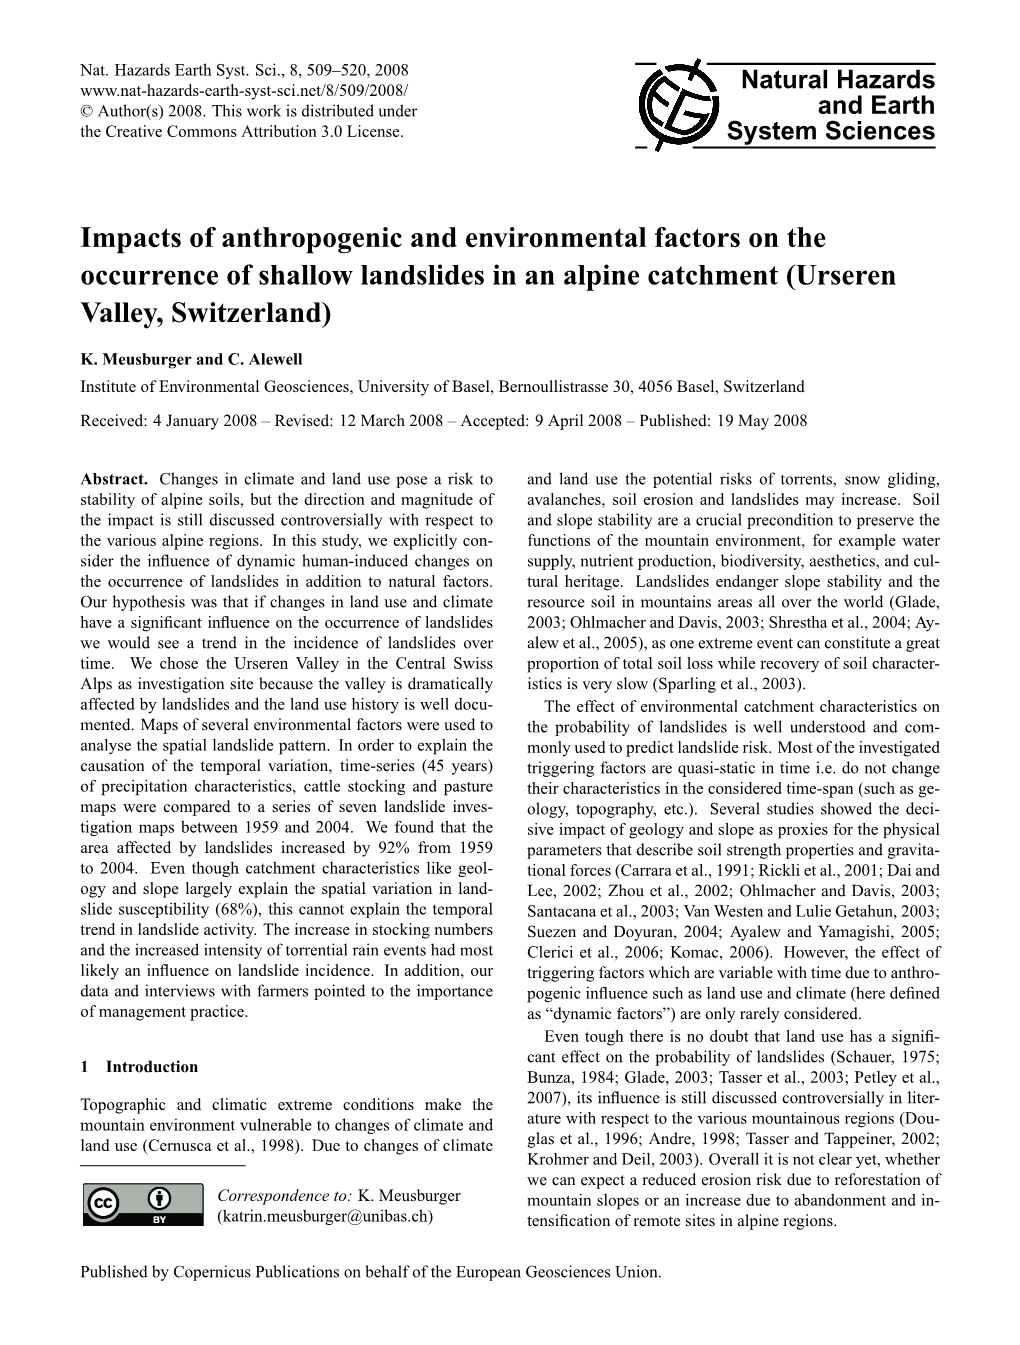 Impacts of Anthropogenic and Environmental Factors on the Occurrence of Shallow Landslides in an Alpine Catchment (Urseren Valley, Switzerland)